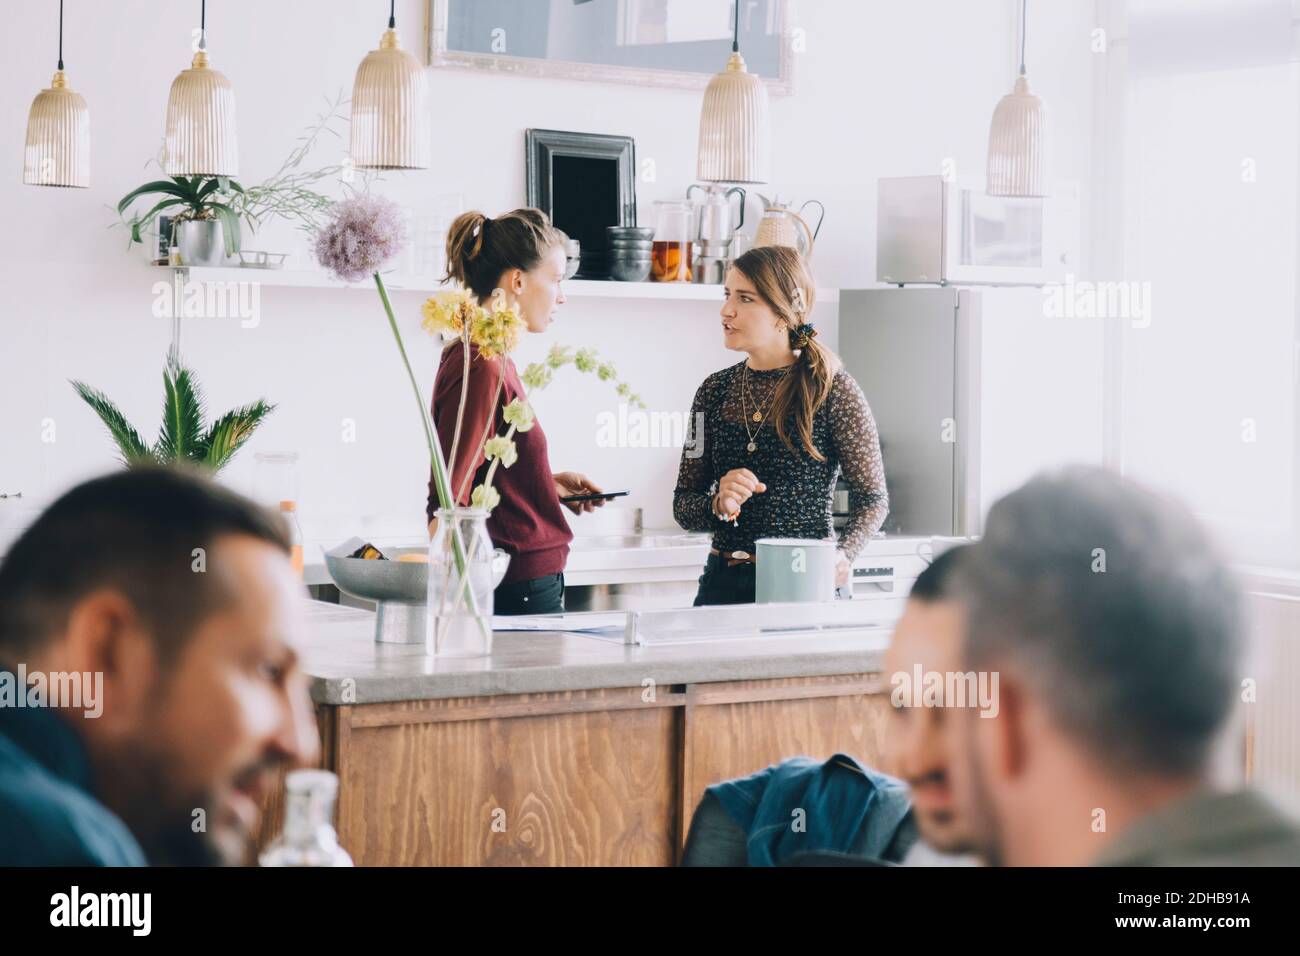 Creative female entrepreneurs discussing at kitchen island while colleagues in foreground at office Stock Photo